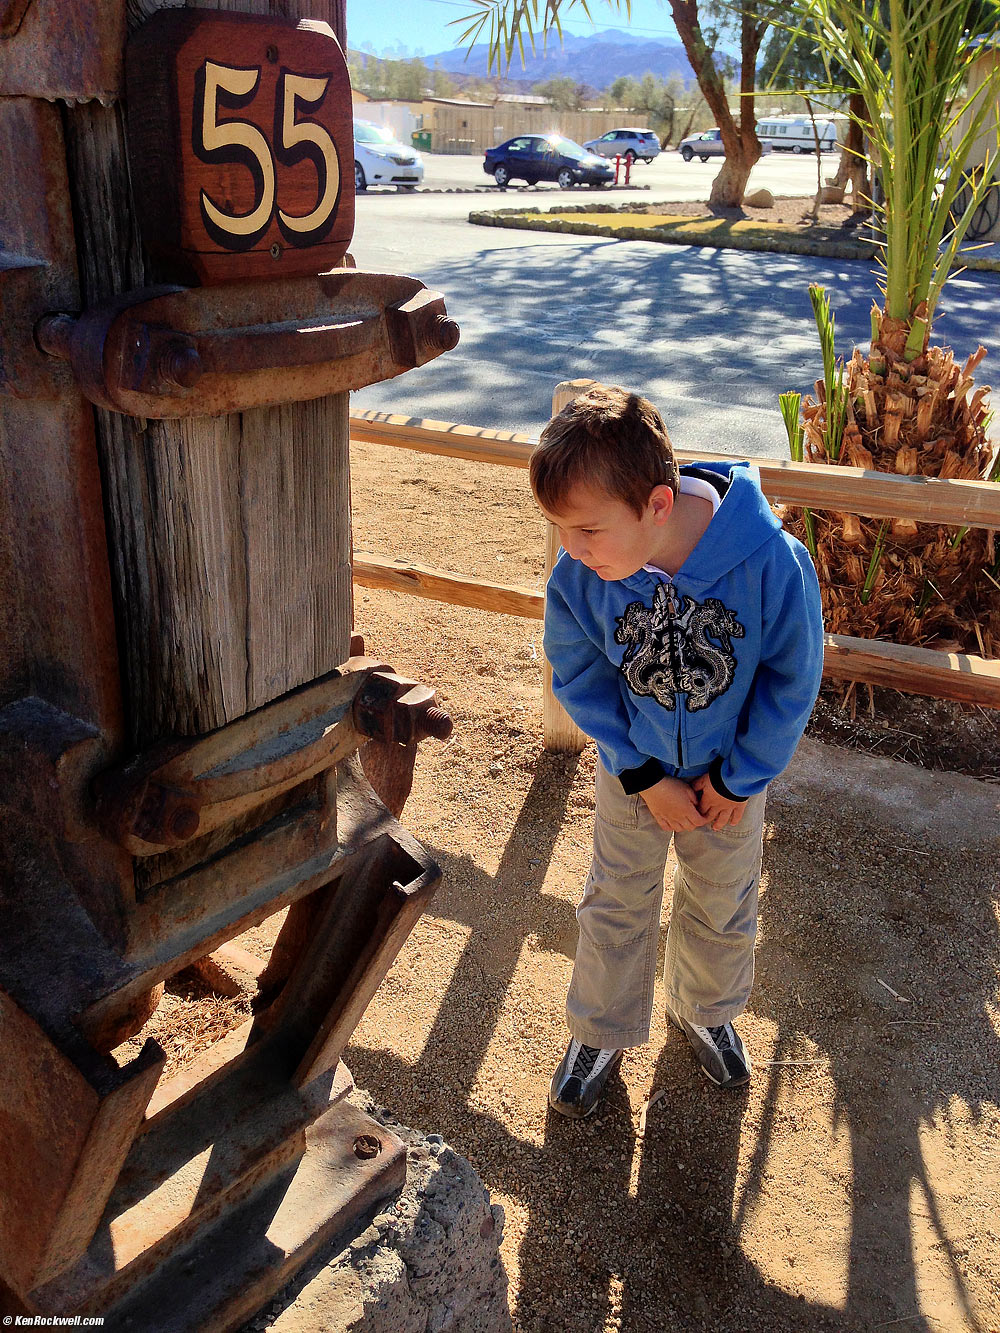 Ryan looking at the stamp mill at the museum, Furnace Creek Resort, Death Valley, California 10:27 AM.